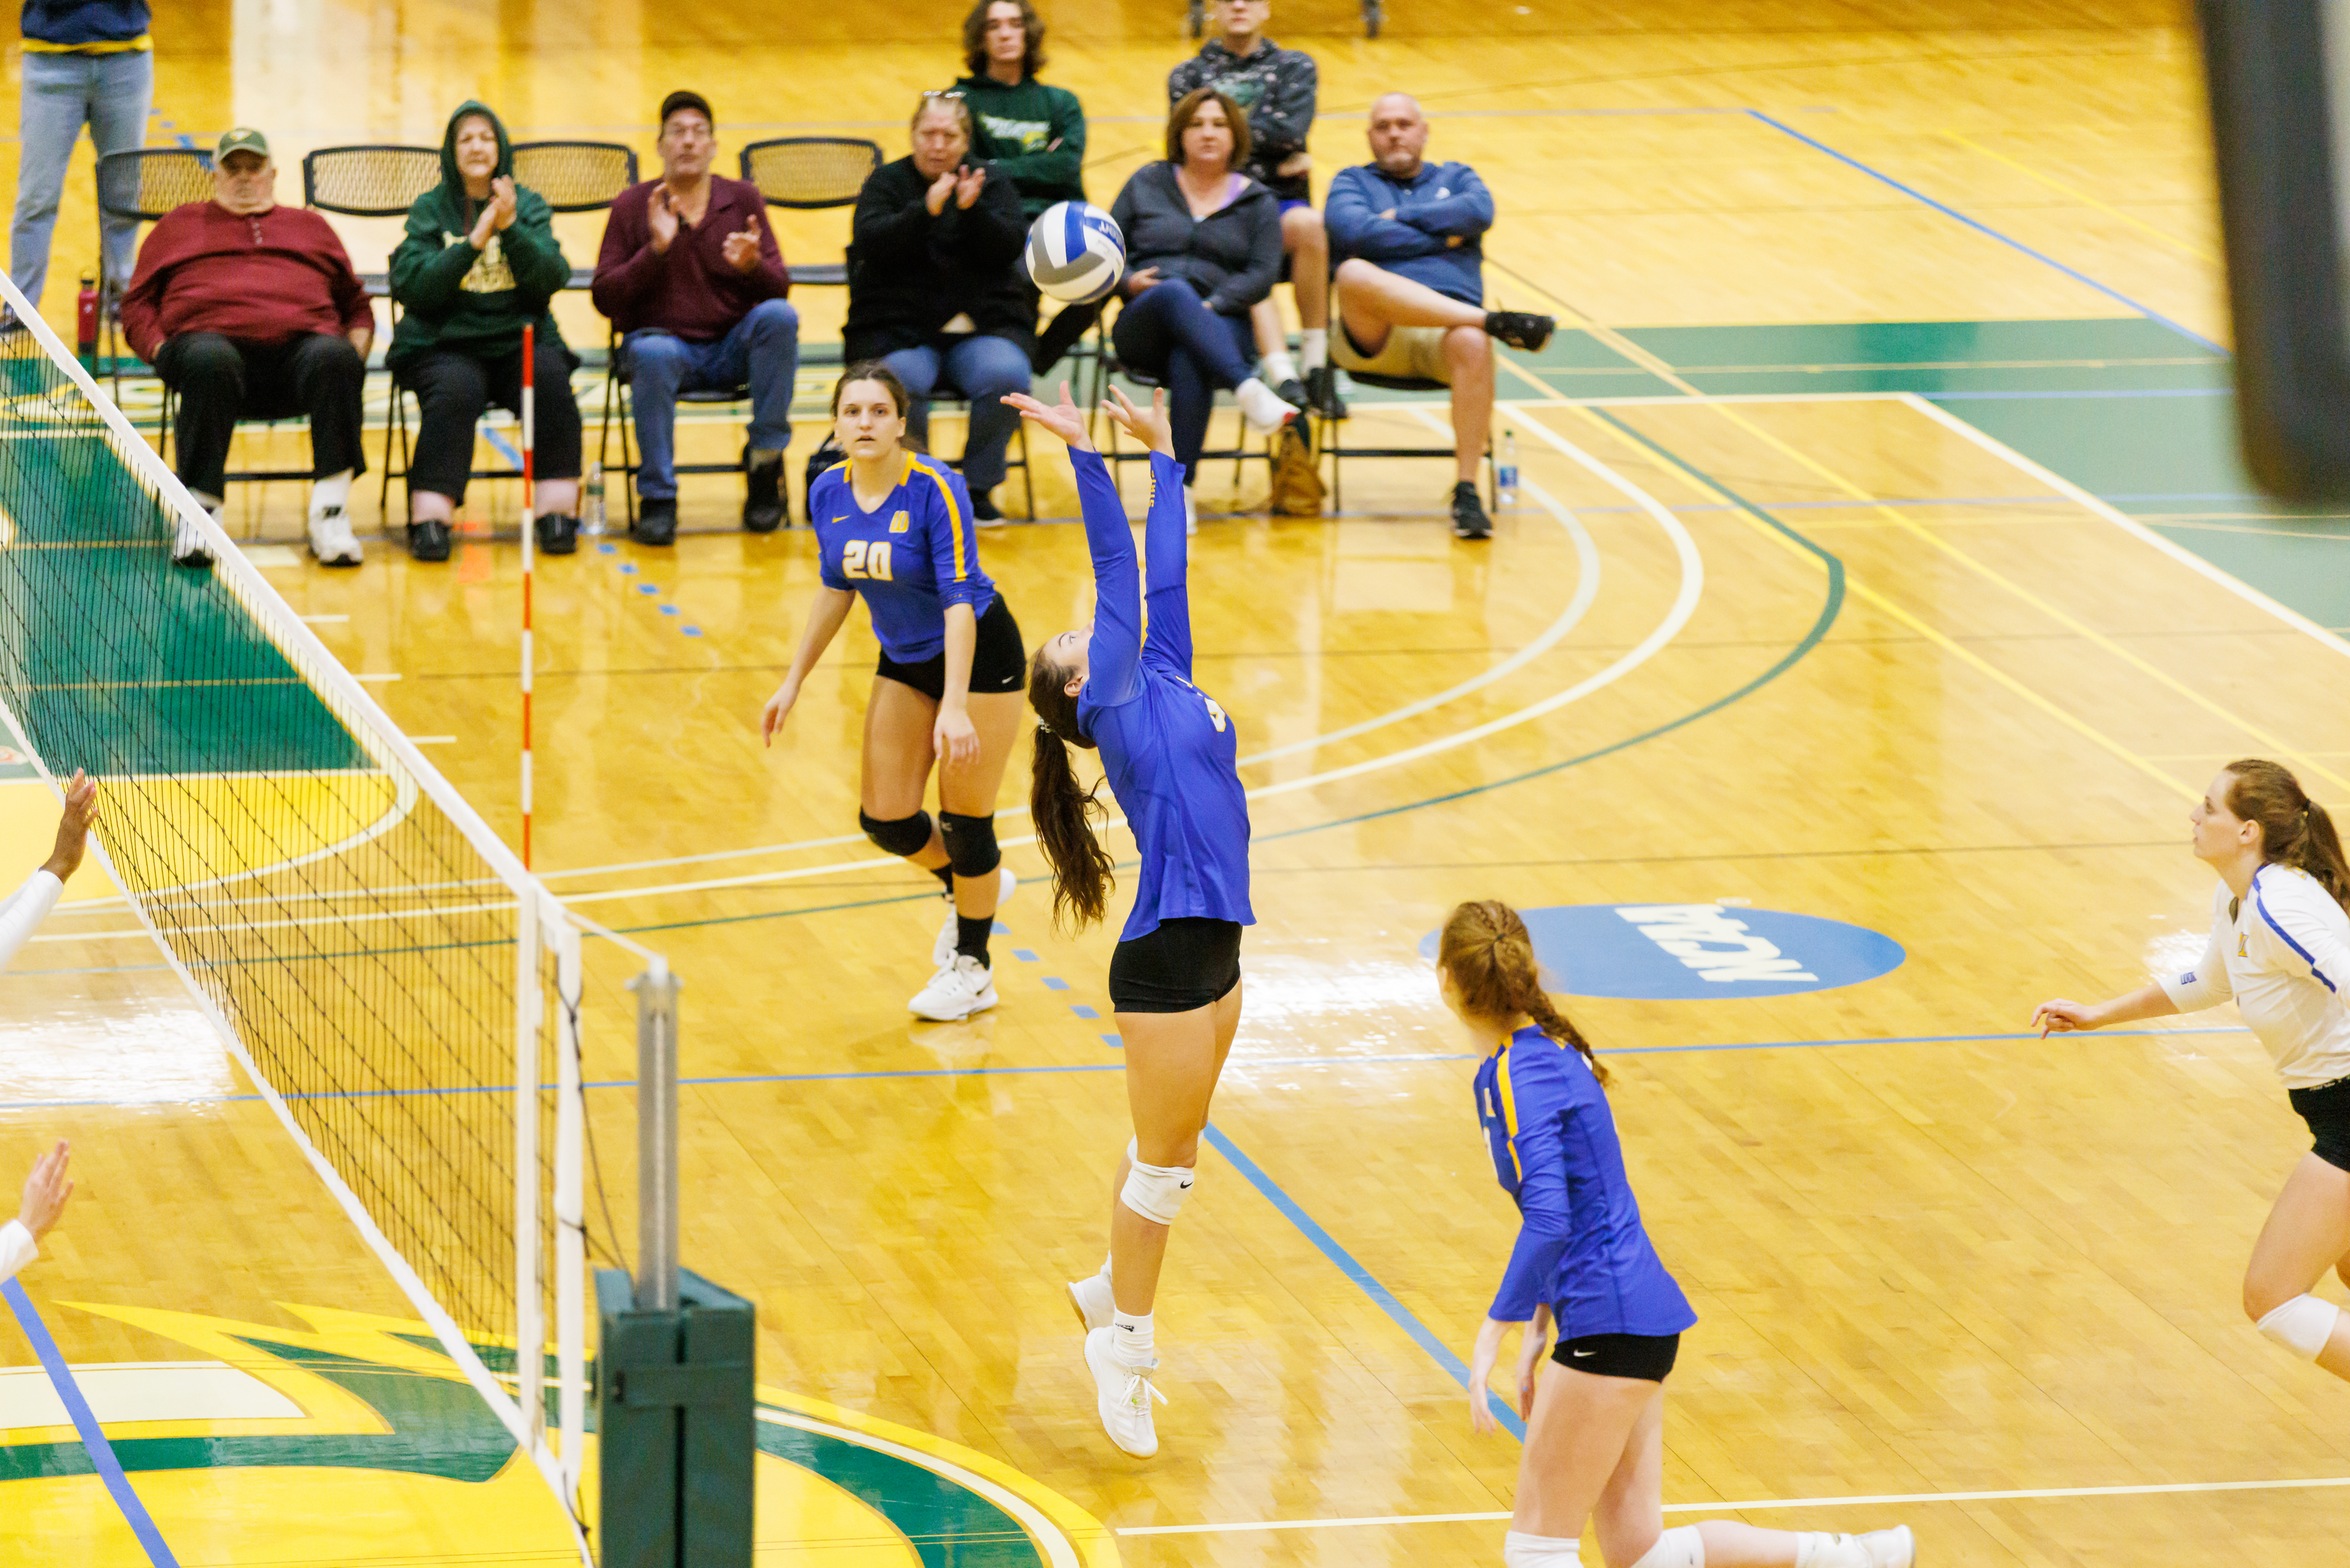 Lancers Victorious over MCLA in MASCAC Volleyball Play